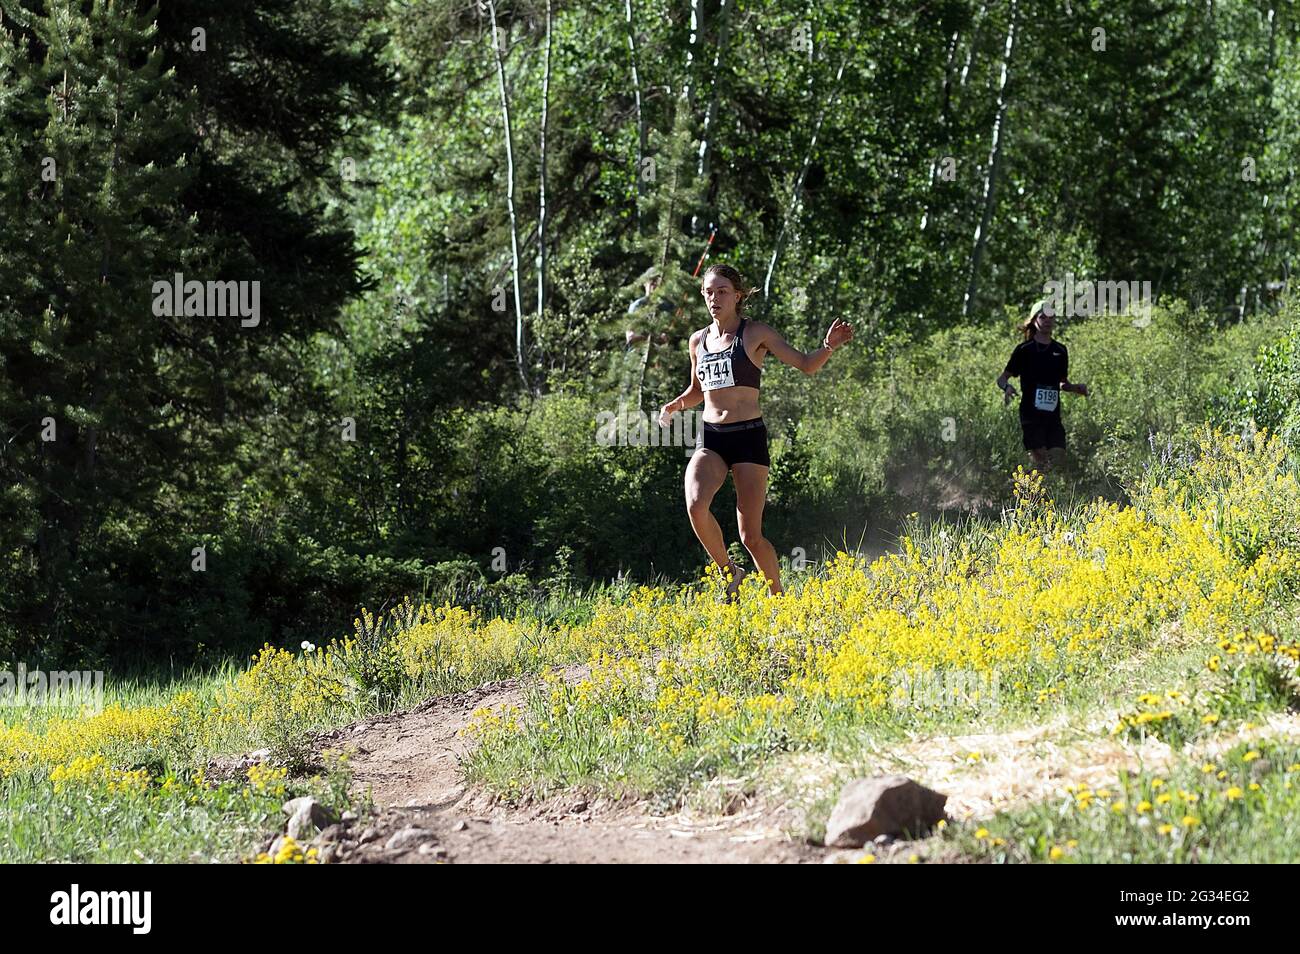 June 13, 2021: Thorton, Colorado runner, Janelle Lincks, emerges from the forest on her way to winning the Women's 2021 Addias Terrex 10K Spring Runoff at the GoPro Mountain Games, Vail, Colorado. Stock Photo